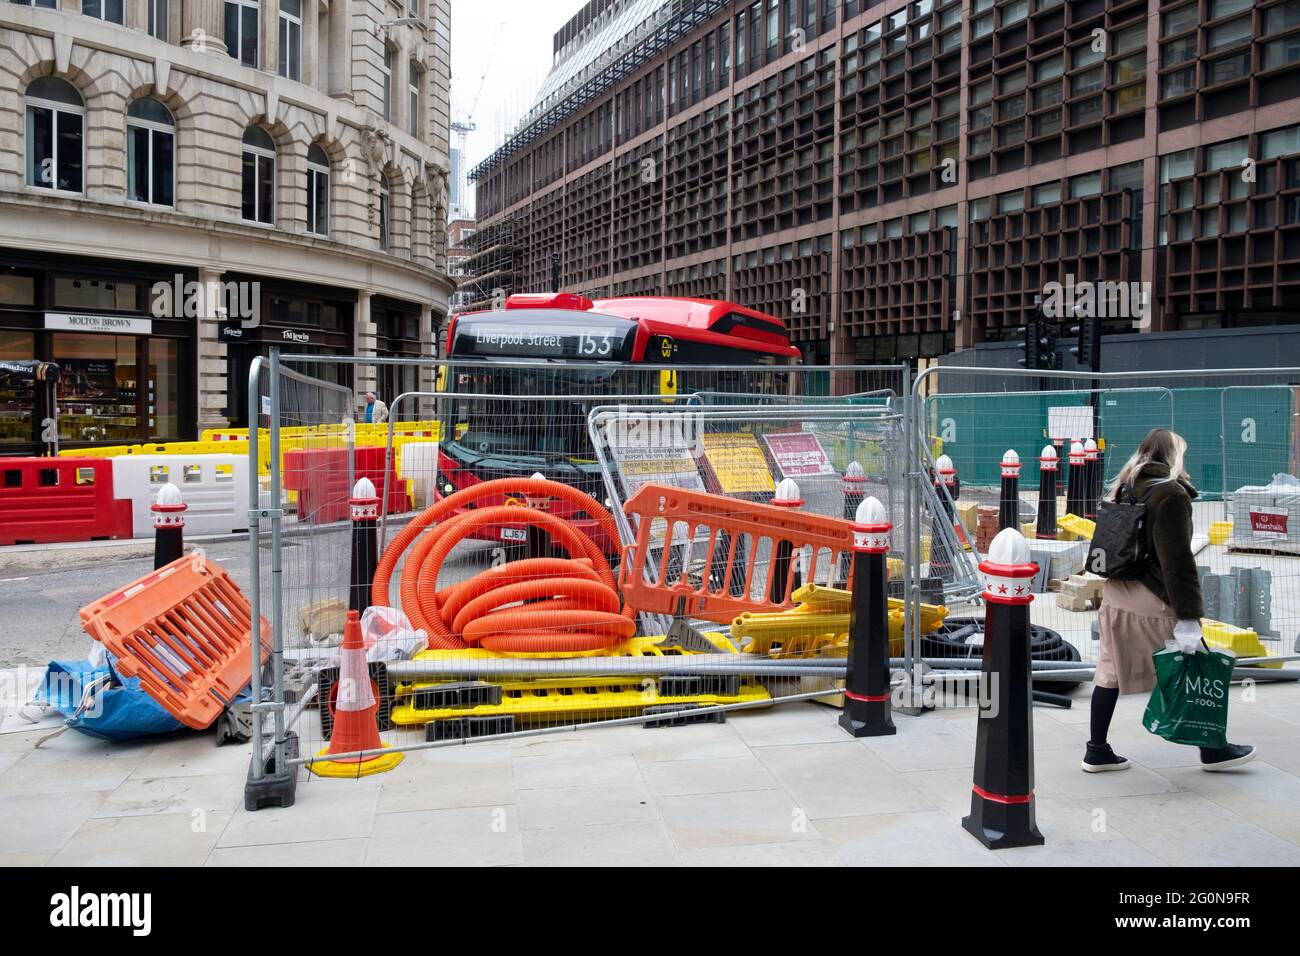 Roadworks near the new Broadgate development by Liverpool Street Station and the Elizabeth Line construction site in London England UK KATHY DEWITT Stock Photo